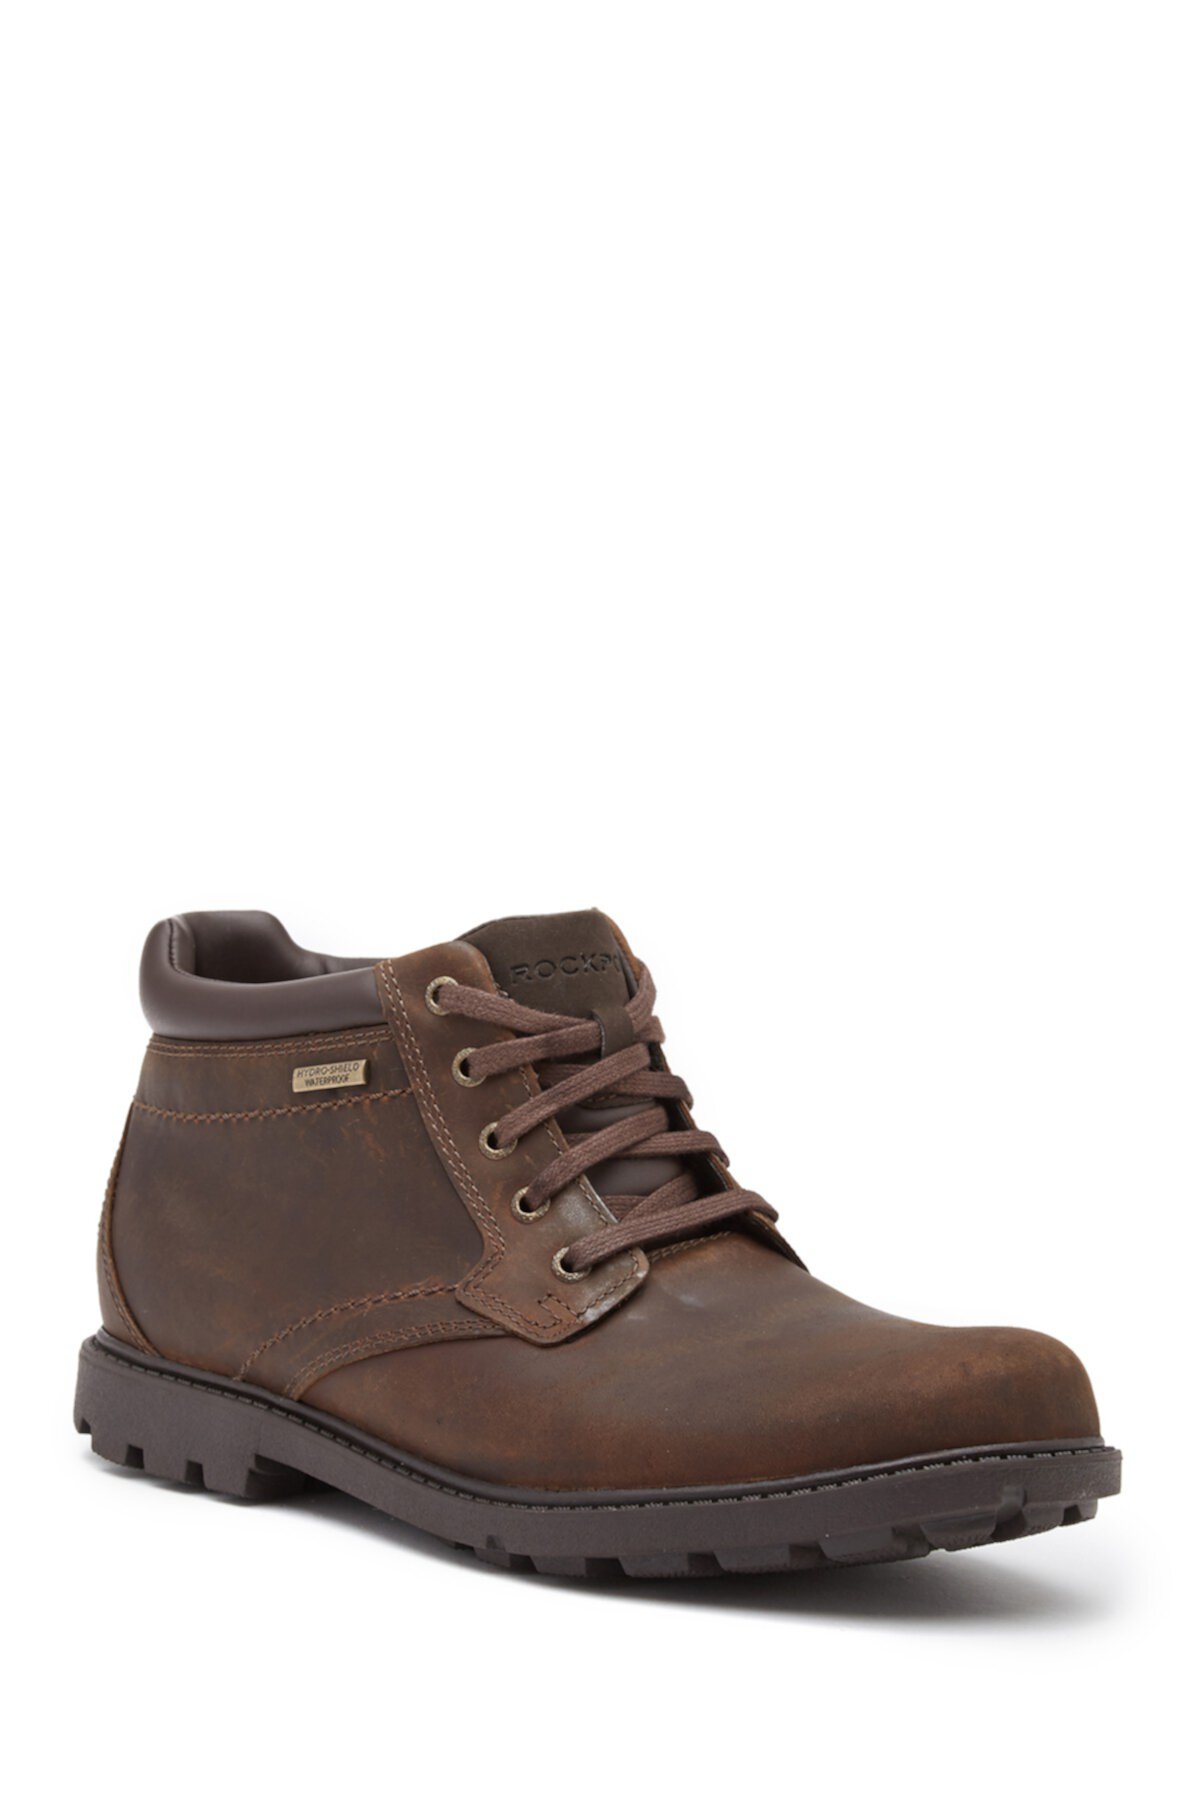 Storm Surge Waterproof Plain Toe Boot - Wide Width Available Rockport